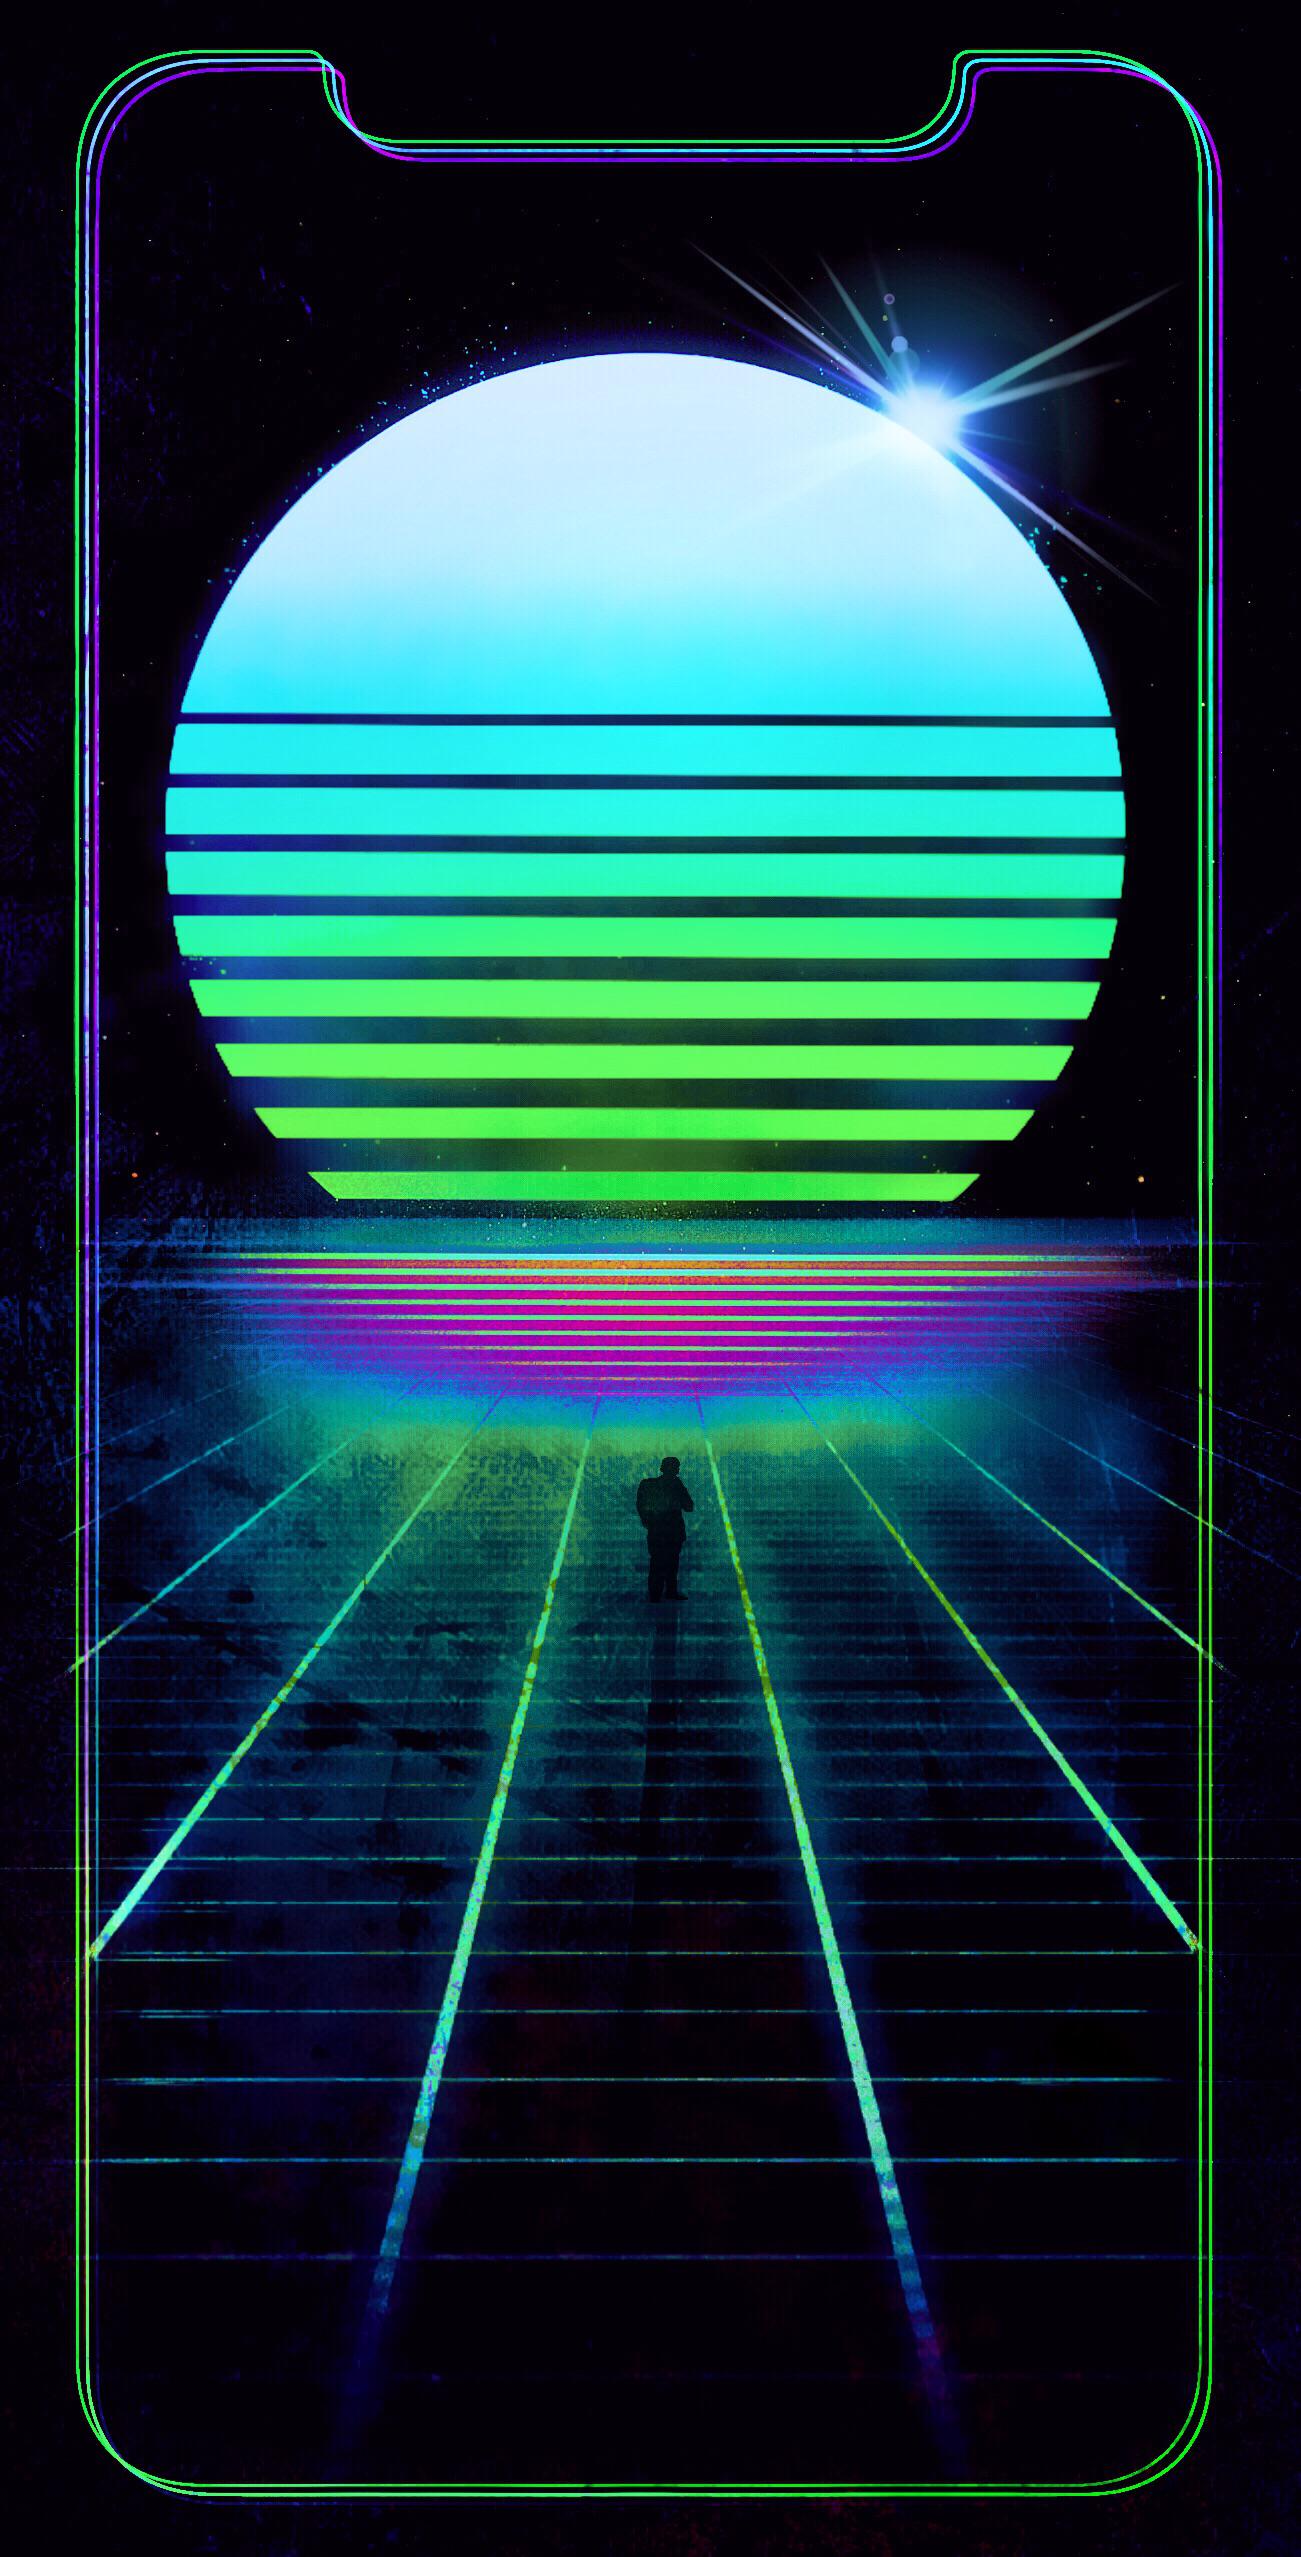 IPhone wallpaper of a man walking on a track with a sunset in the background - Synthwave